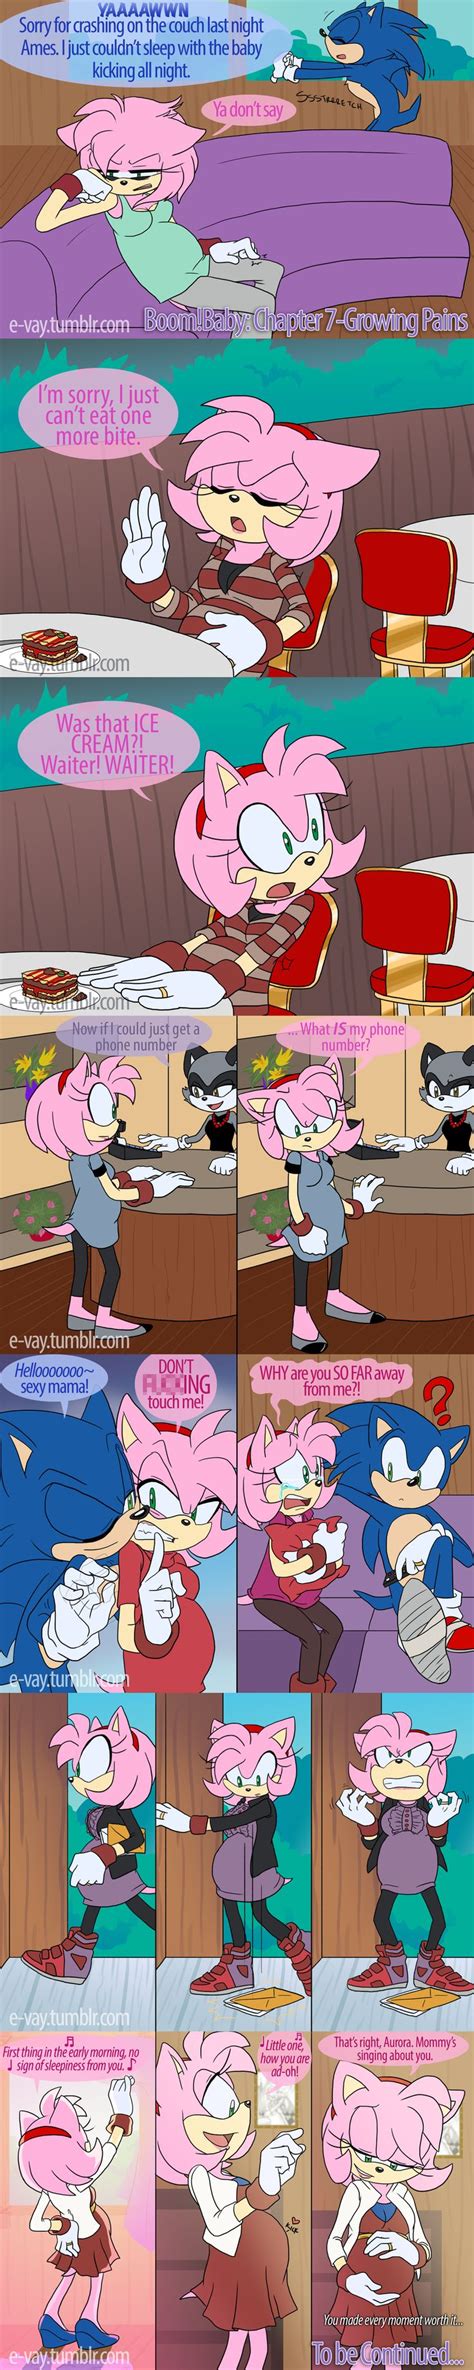 Boom Baby Chapter 7 Growing Pains By E Vay On DeviantArt Sonic Funny